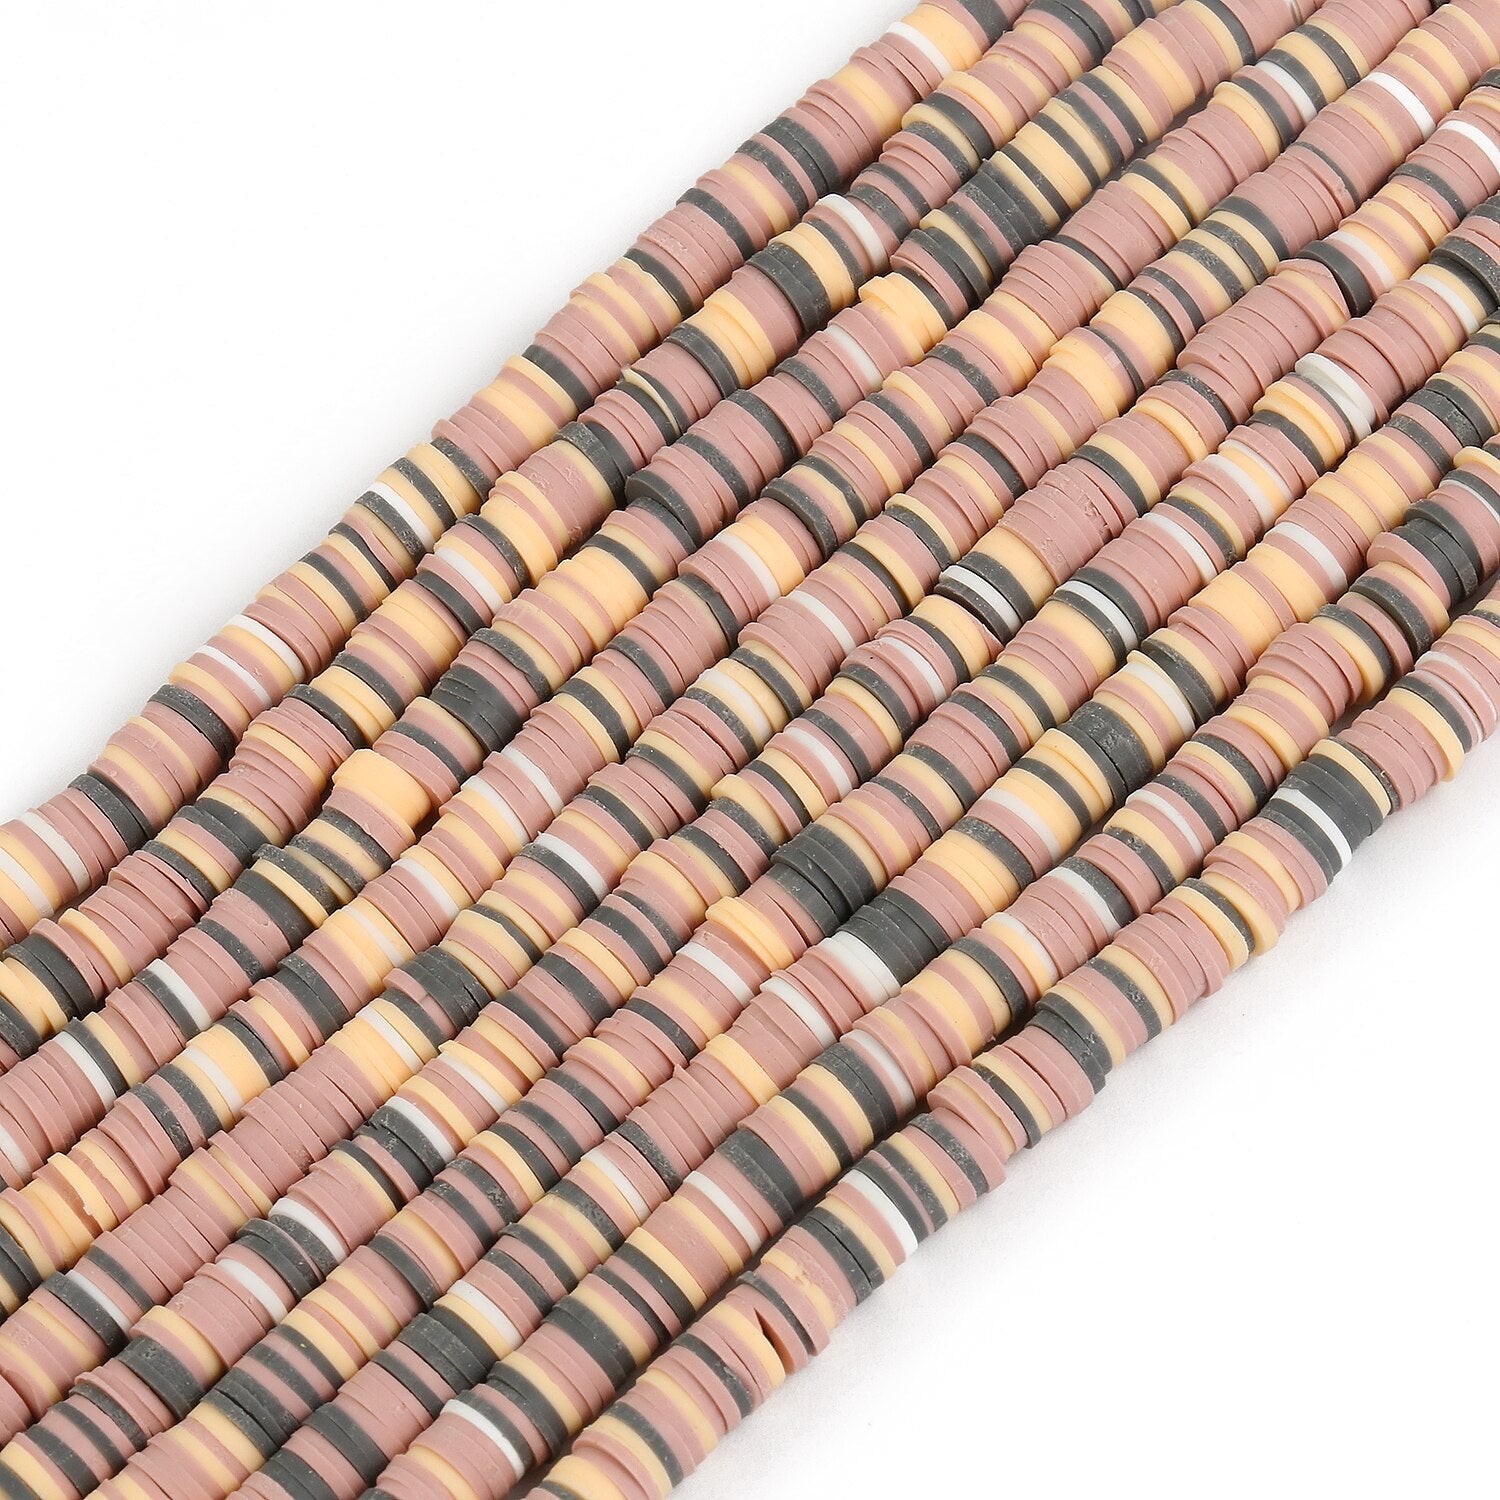 Get Creative with 300-320pcs of Boho African Disc Soft Clay Beads - Flexi Africa - Free Delivery Worldwide International